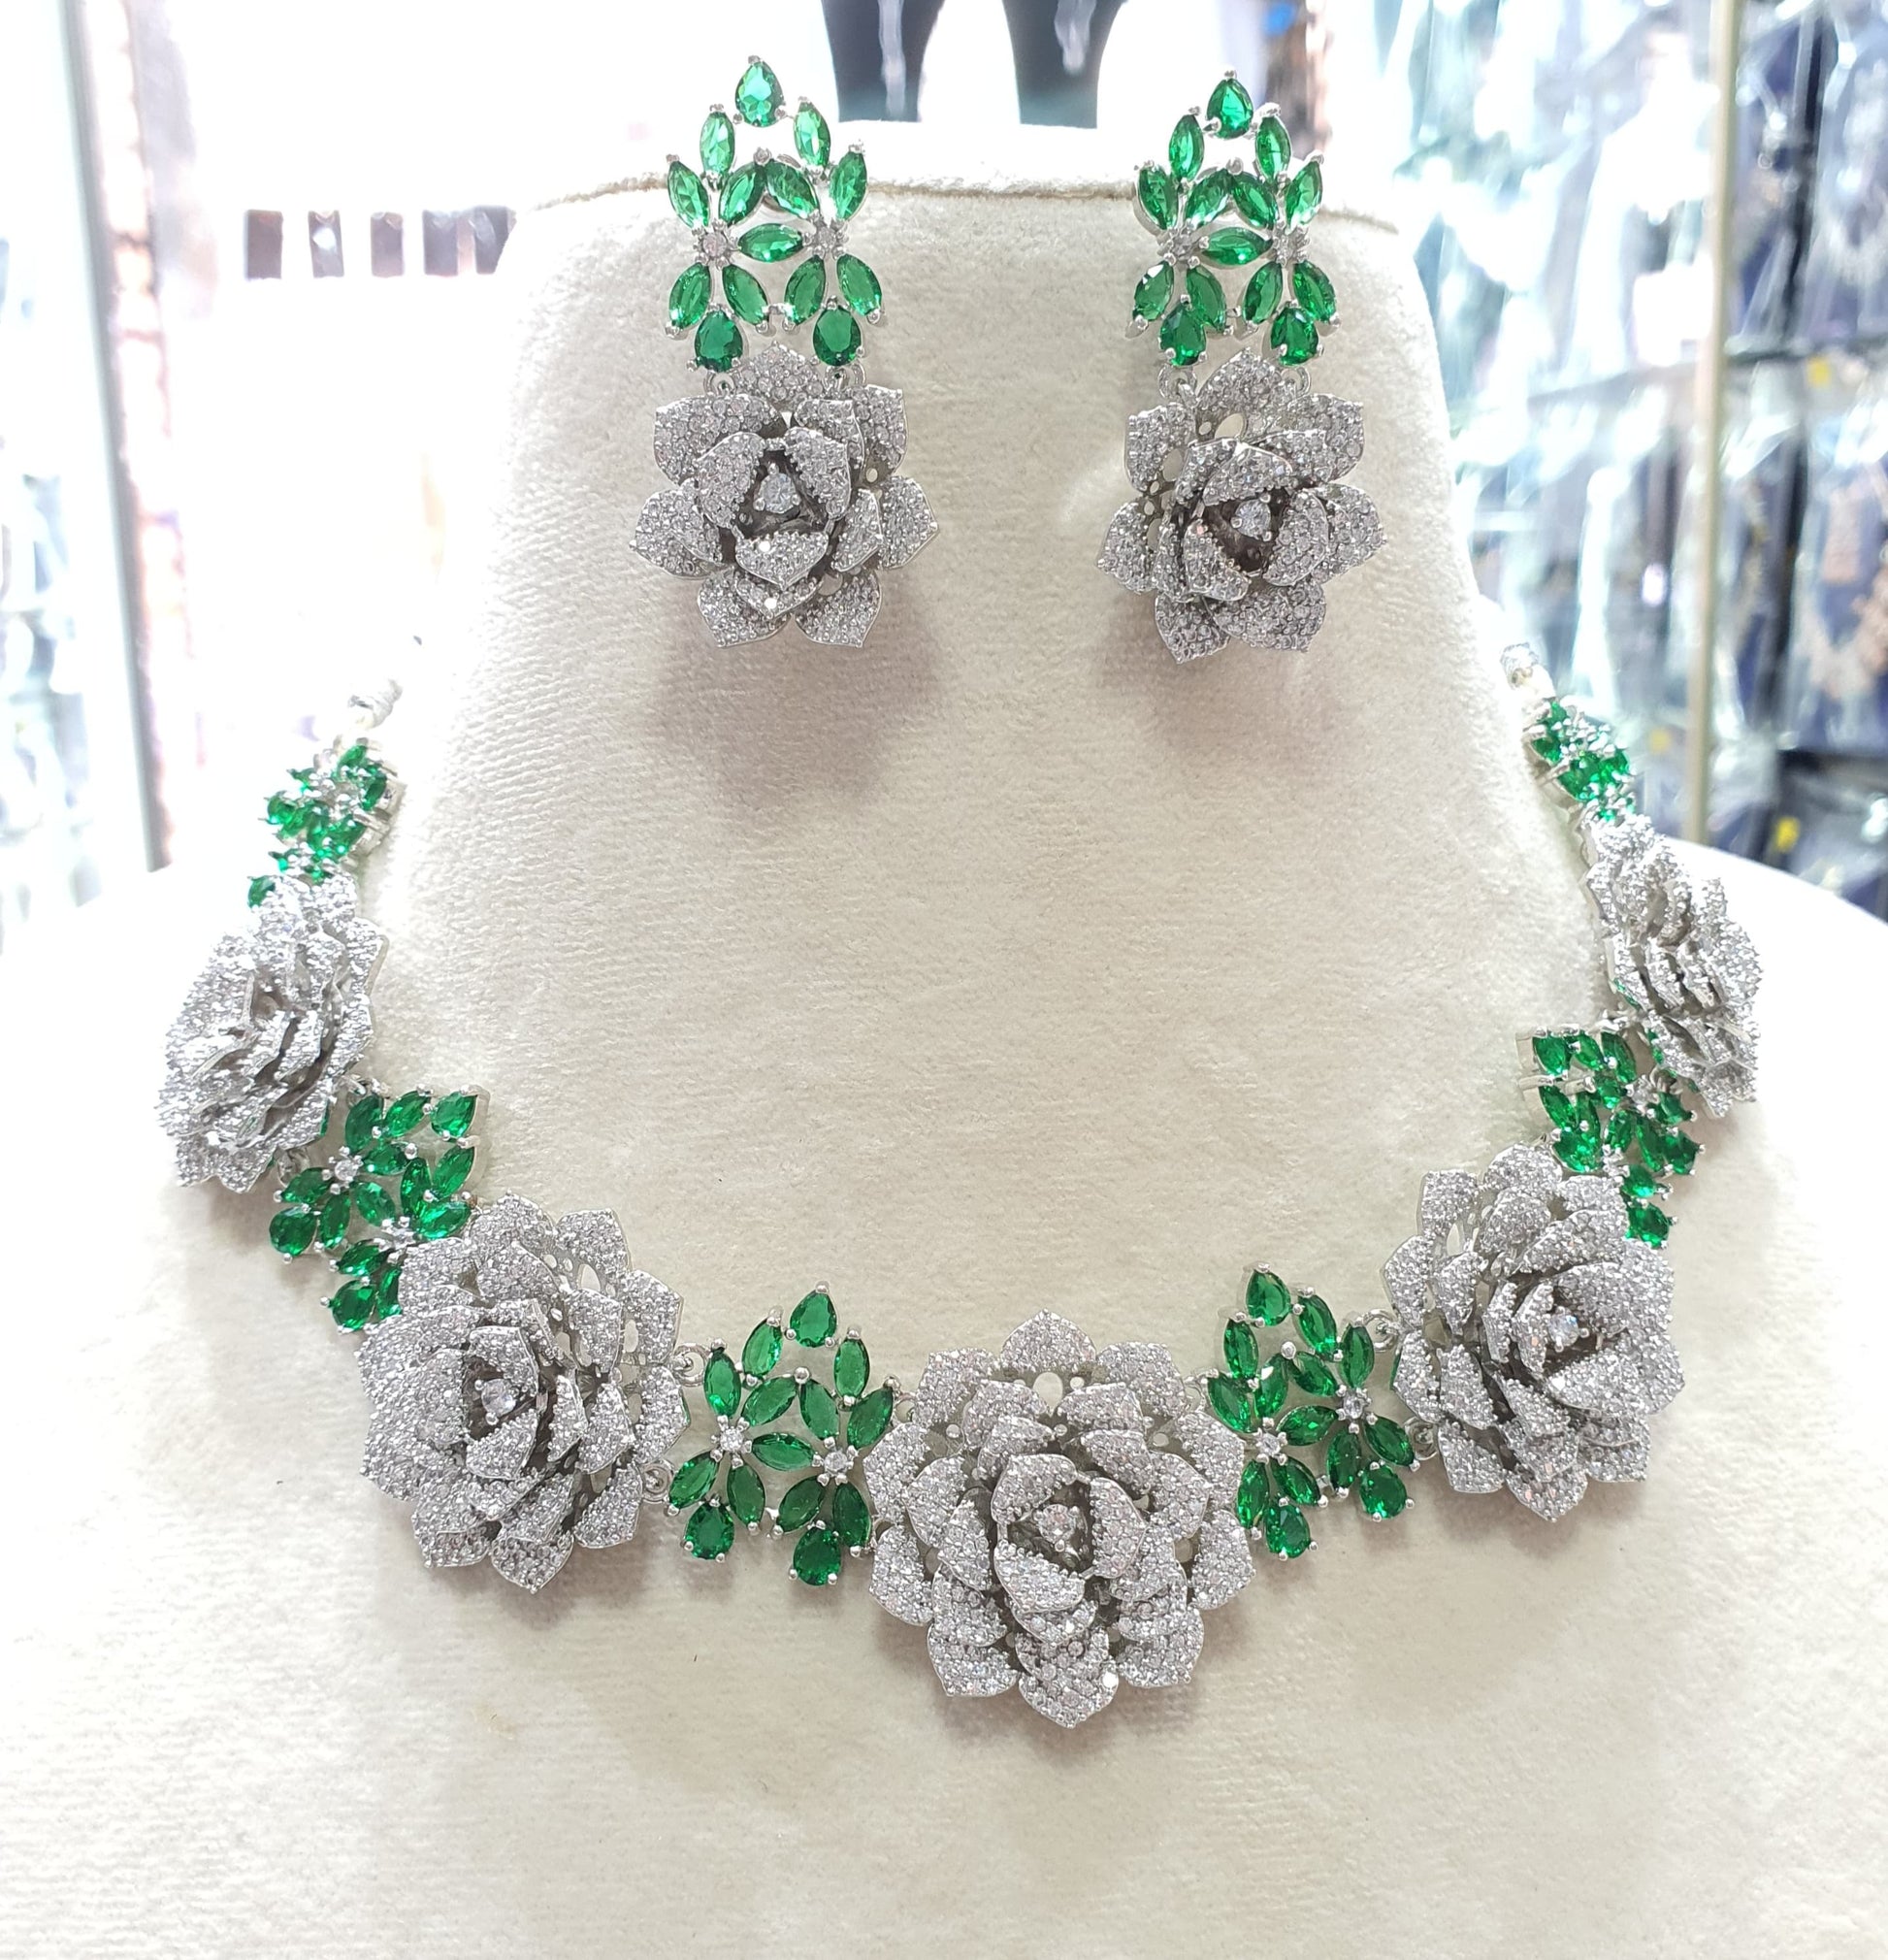 Amazing Flower Design American Diamond Stone Necklace Set with Earrings -Silver